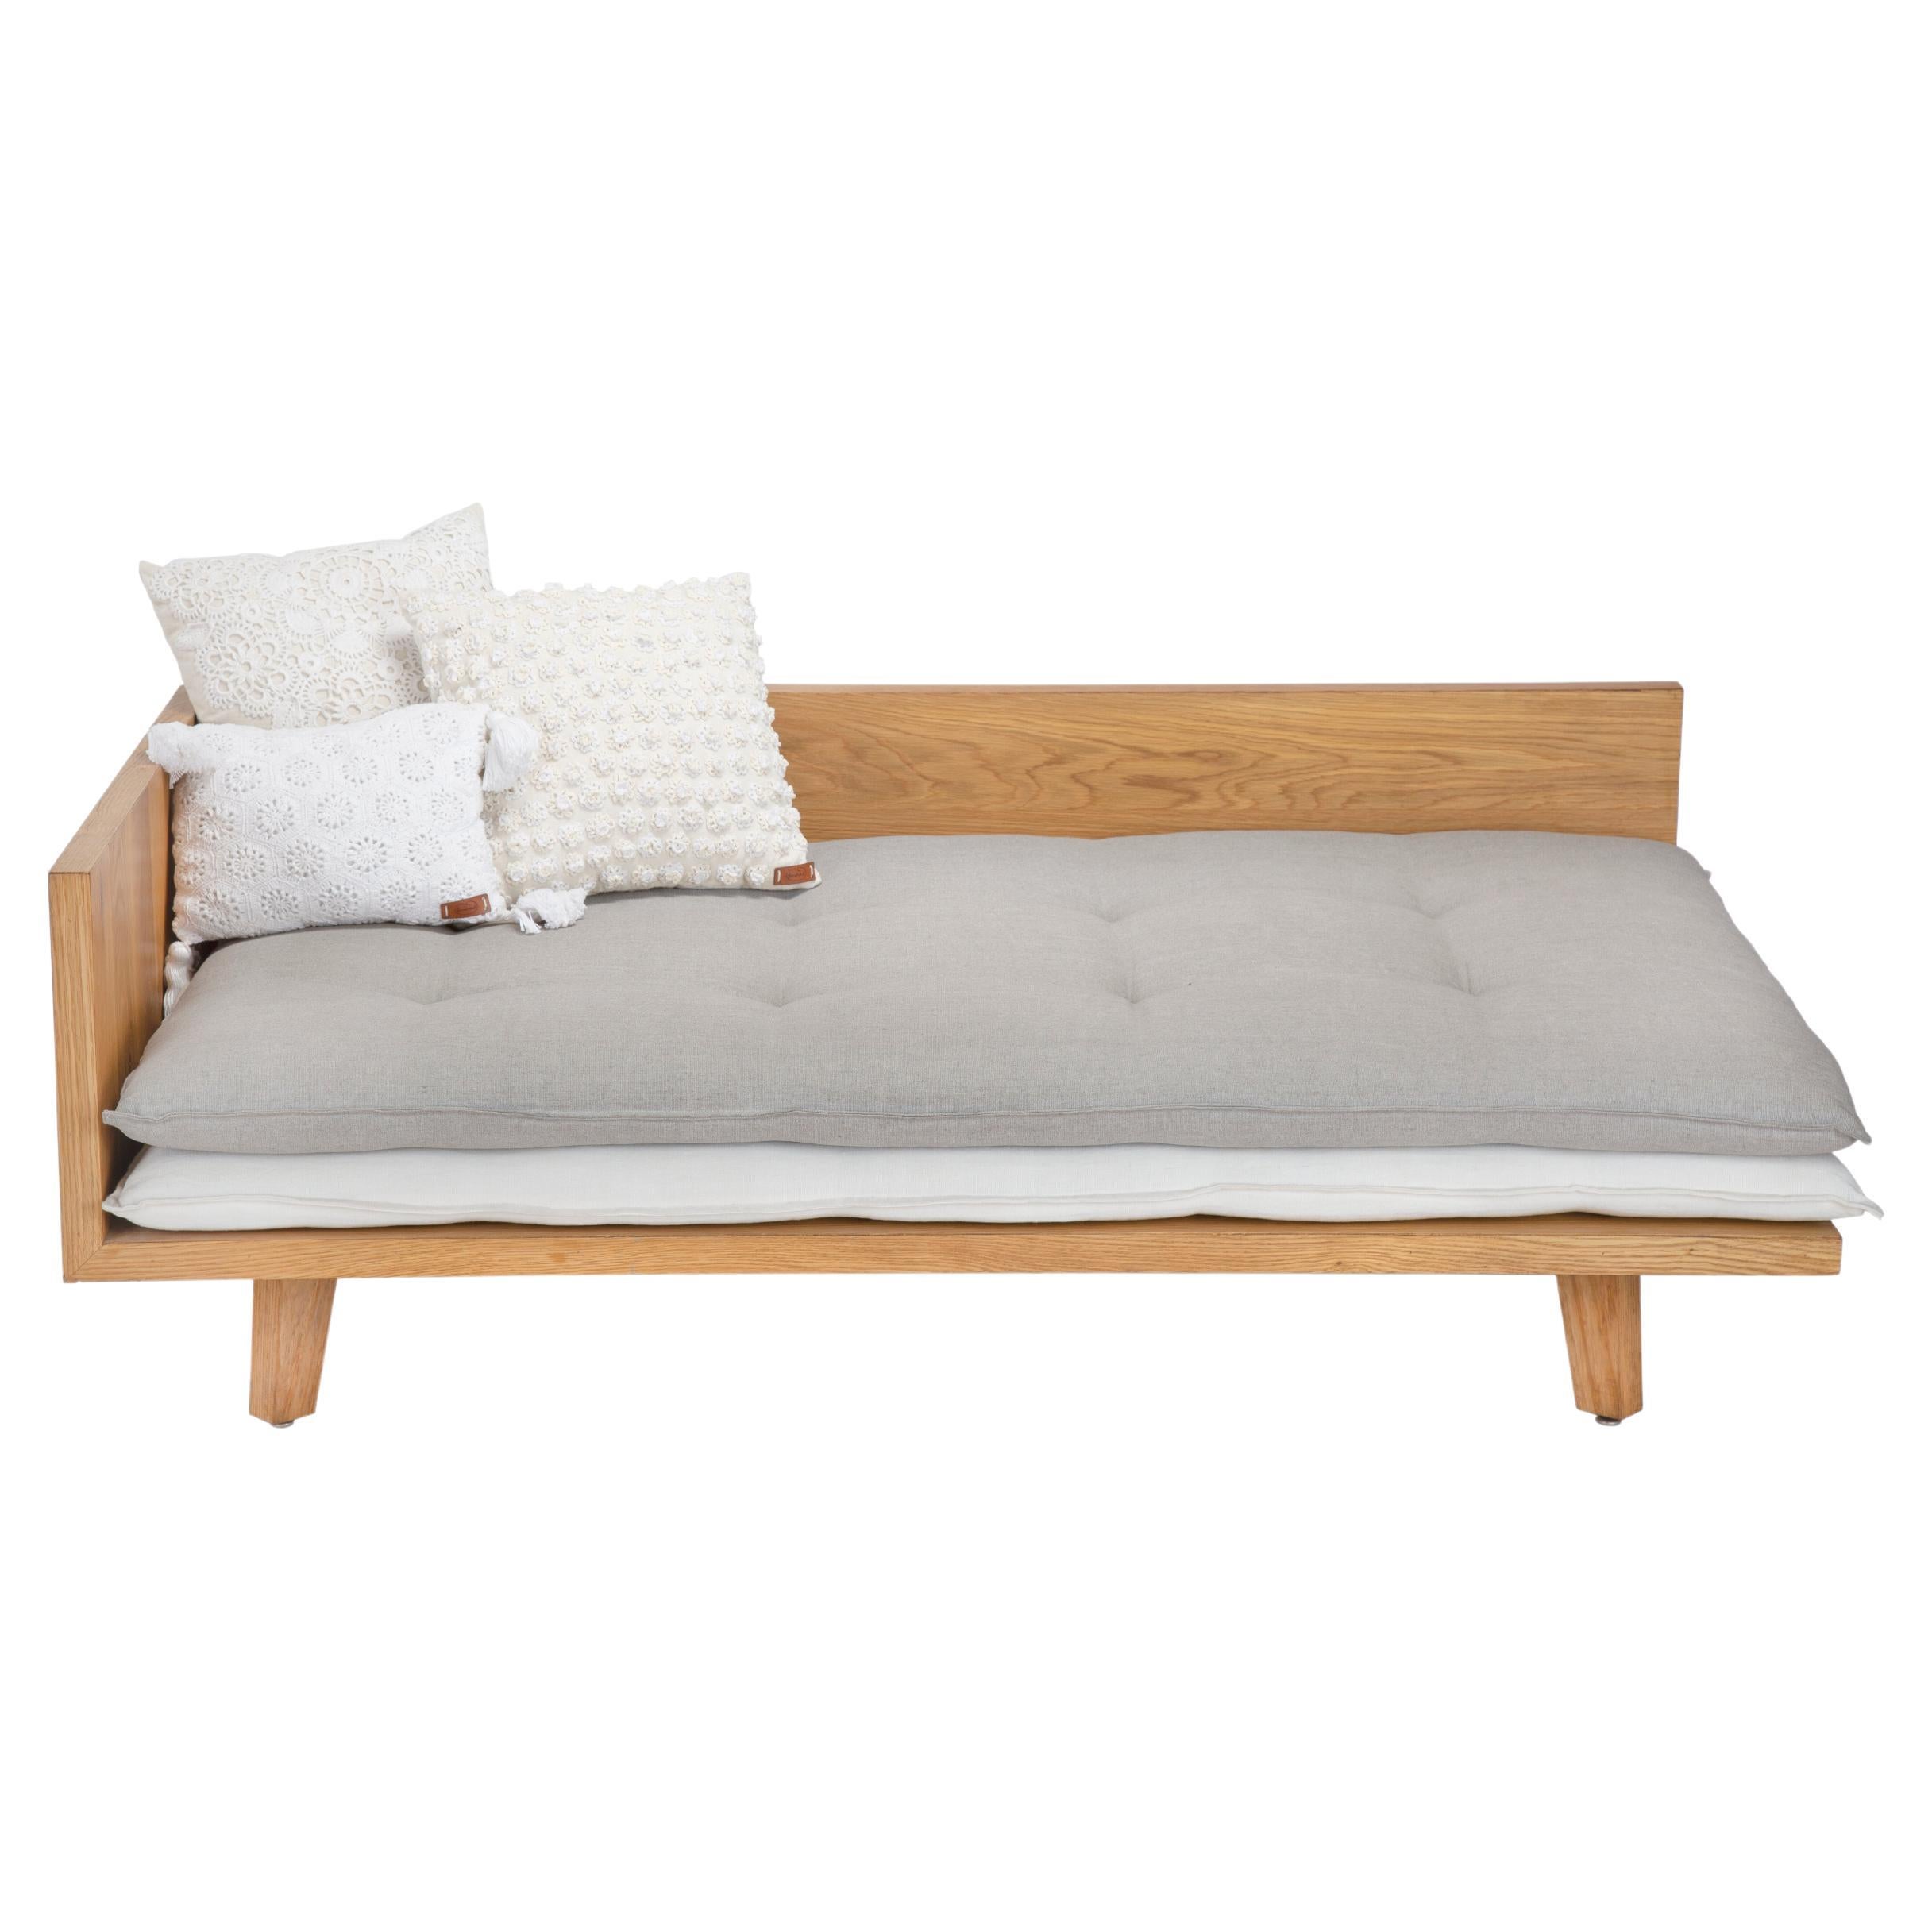 Outdoor Oil-Treated Oak Wood Chaise Longue with Double Mattresses